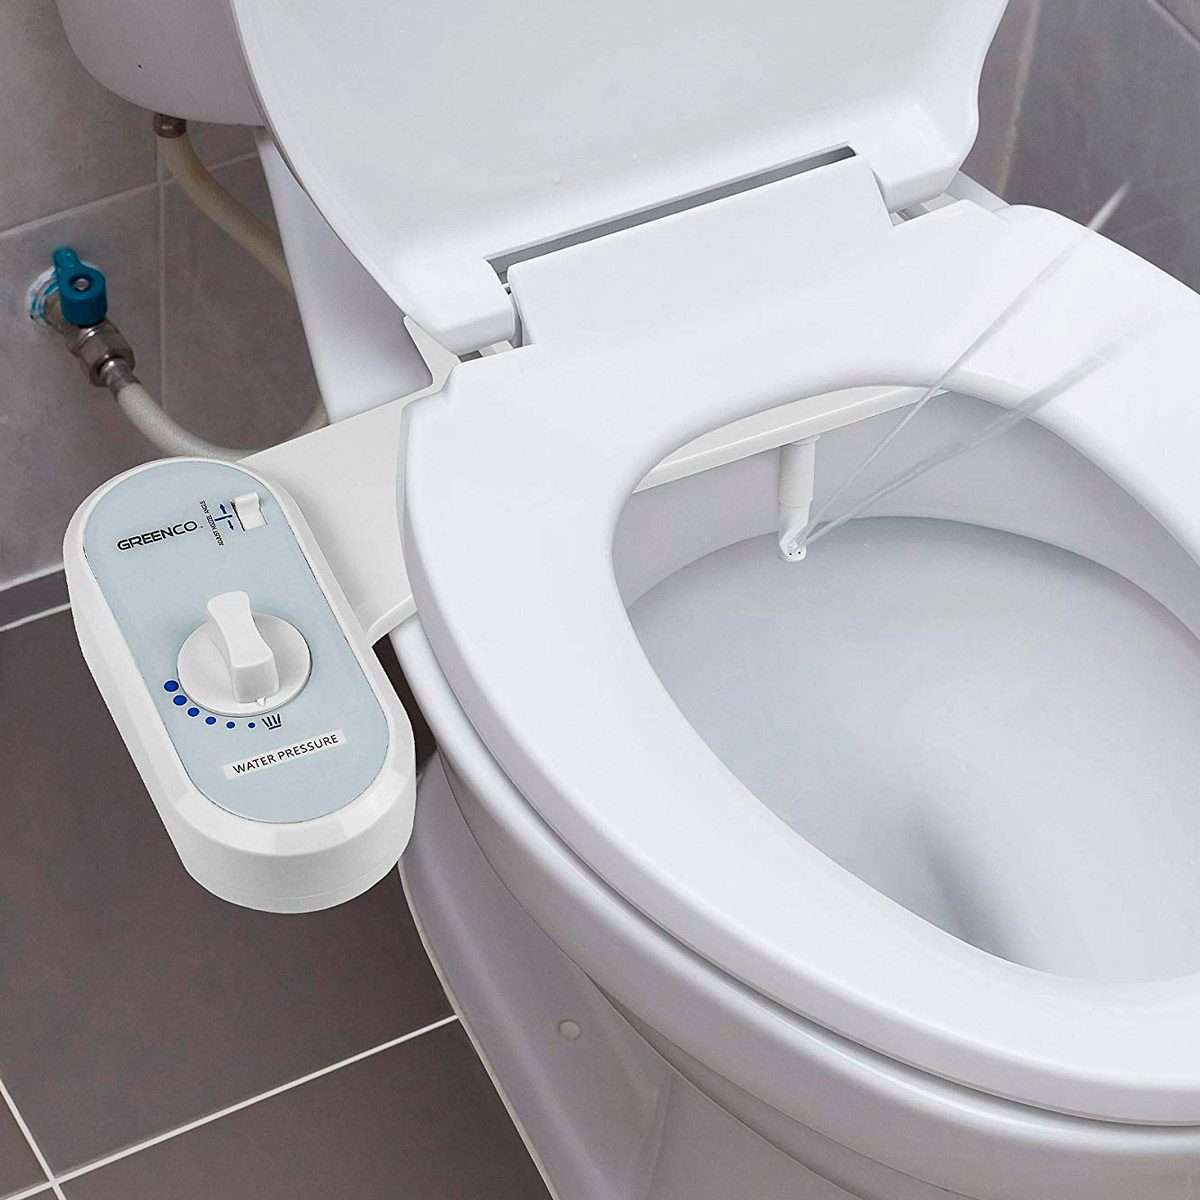 <p>This <a href="https://www.amazon.com/dp/B01A17T3N6/?tag=fhm_msn-20" rel="nofollow noopener noreferrer">non-electric bidet attachment</a> offers a control dial for instant pressure and nozzle adjustment, giving you just the right cleansing experience. Less expensive than many other popular models, buyers noted this is a best bidet choice when it comes to function and affordability.</p> <p>"I could not be any happier with this bidet, and I completely recommend this to anyone that would like to dump the 'flushable' wipes and still get a clean, fresh experience," says one reviewer.</p> <p class="listicle-page__cta-button-shop"><a class="shop-btn" href="https://www.amazon.com/dp/B01A17T3N6/?tag=fhm_msn-20">Shop Now</a></p>